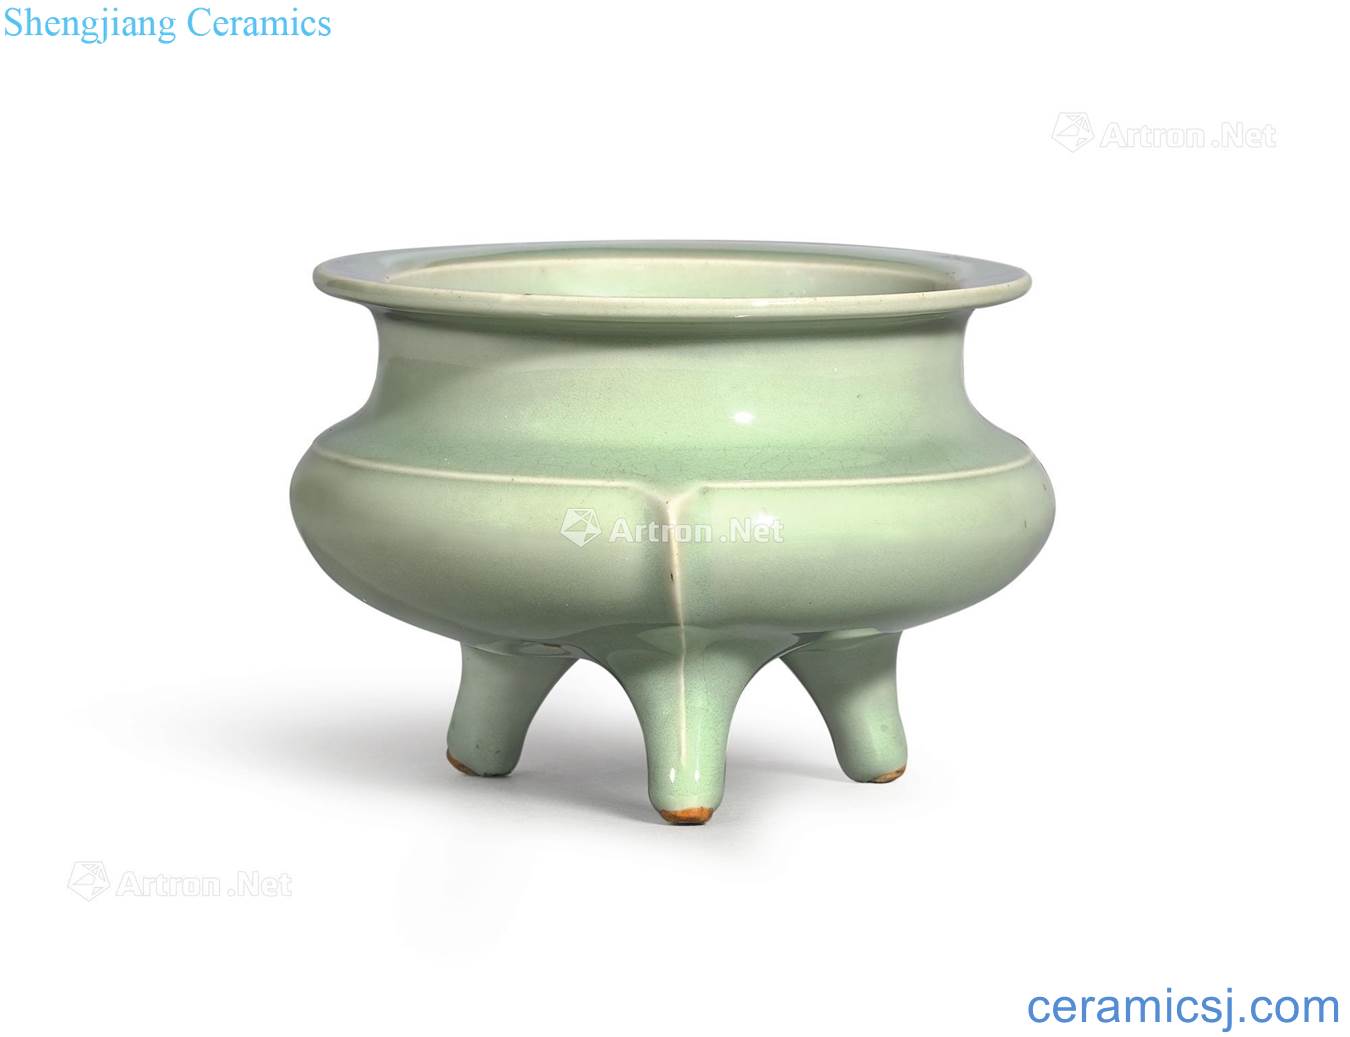 The southern song dynasty to yuan Longquan celadon glaze furnace with three legs